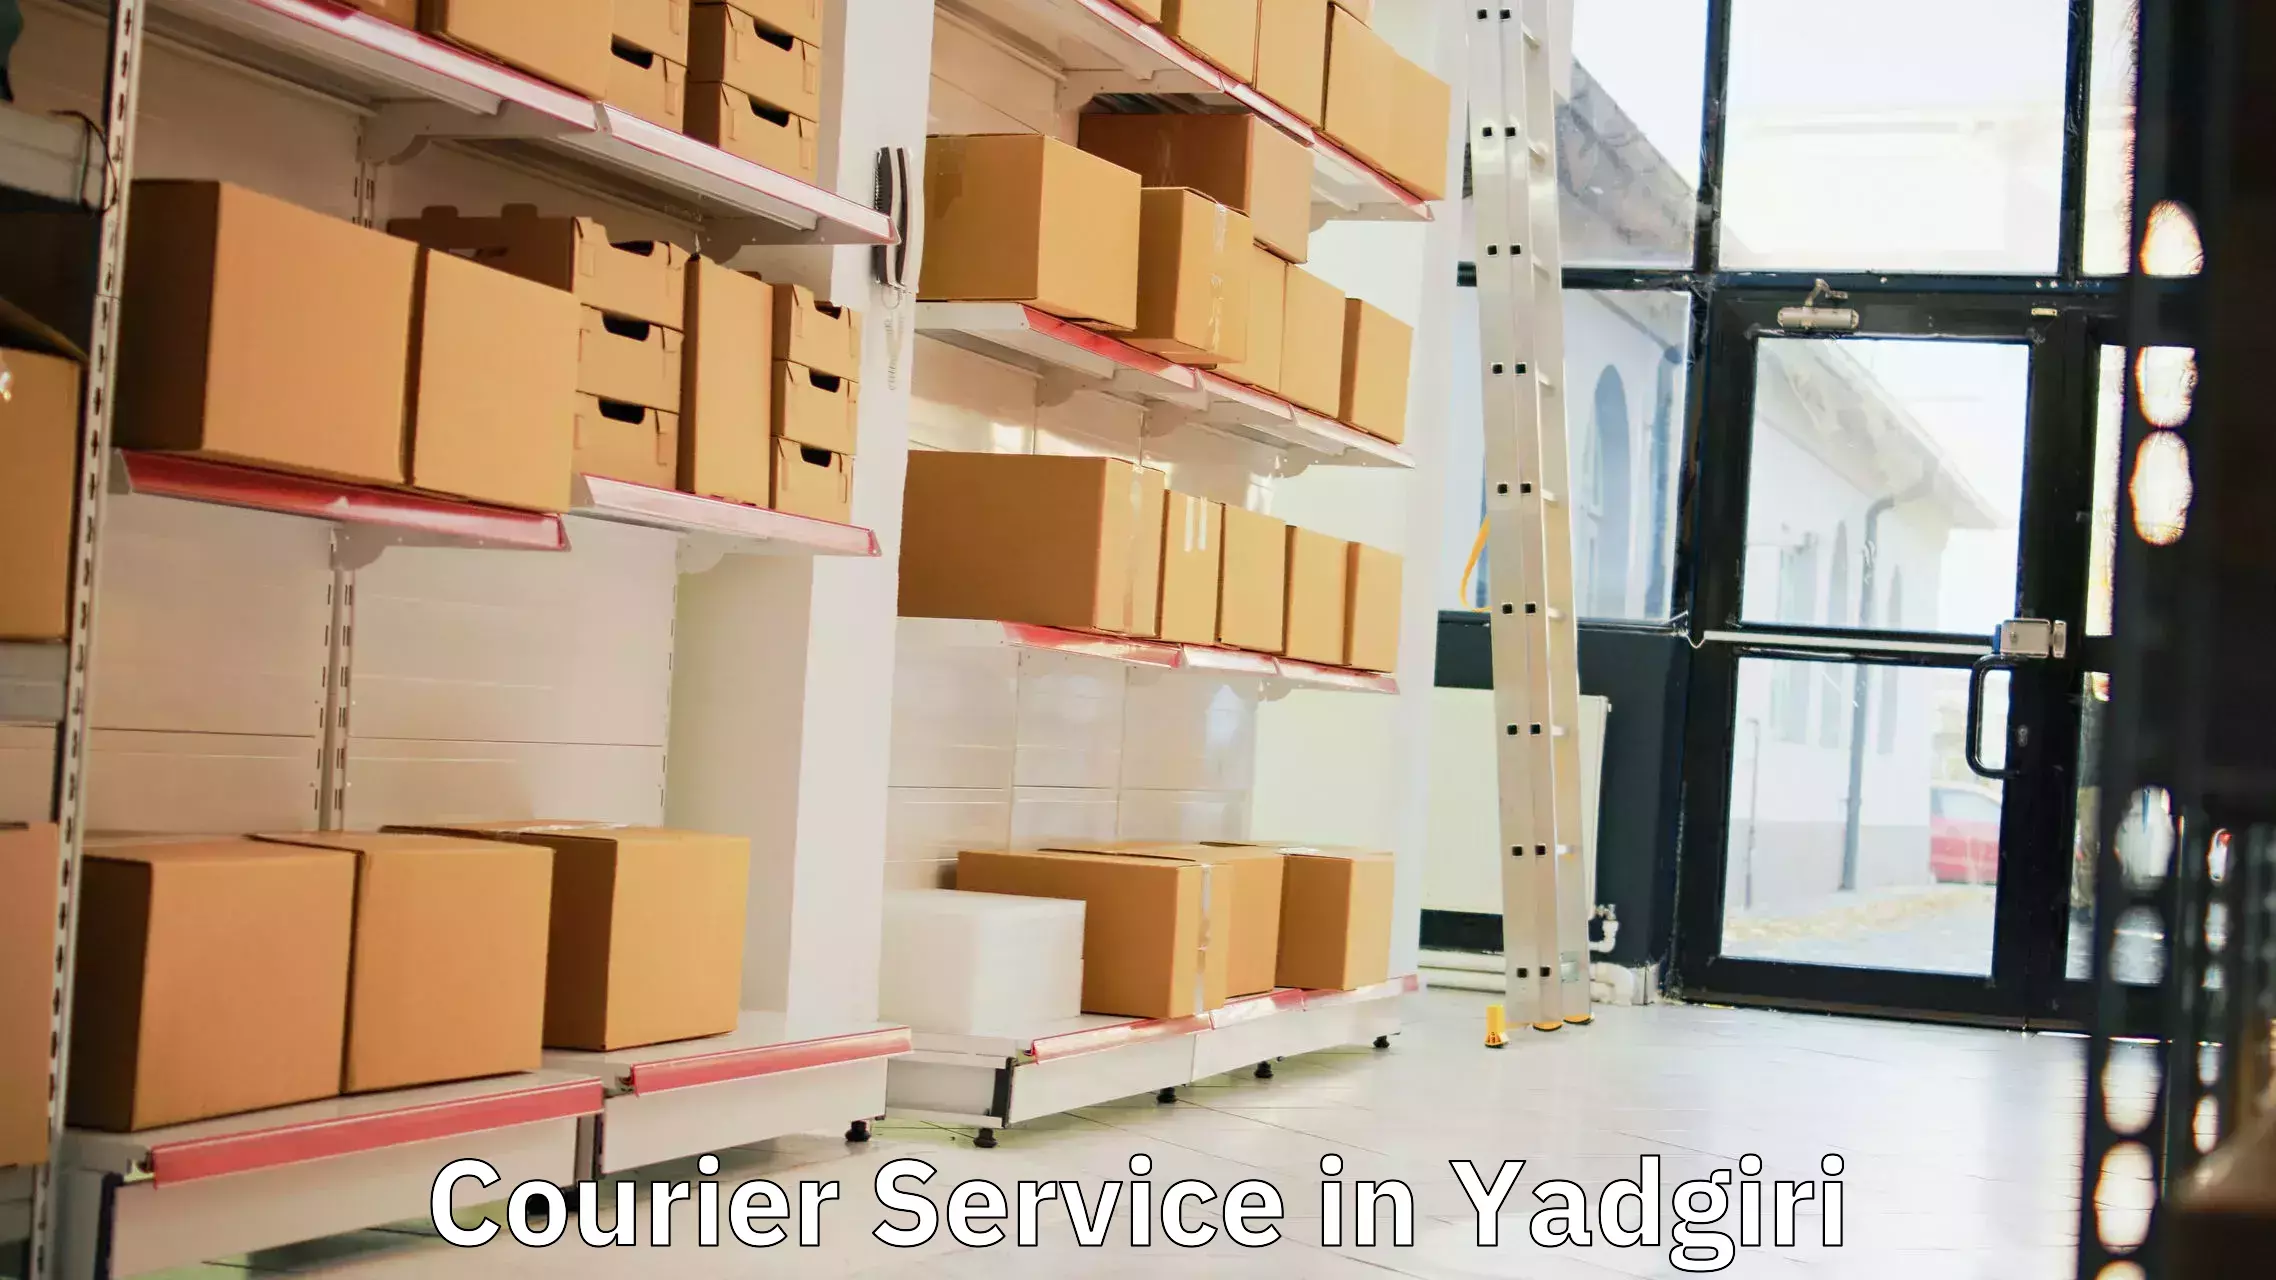 Same-day delivery options in Yadgiri